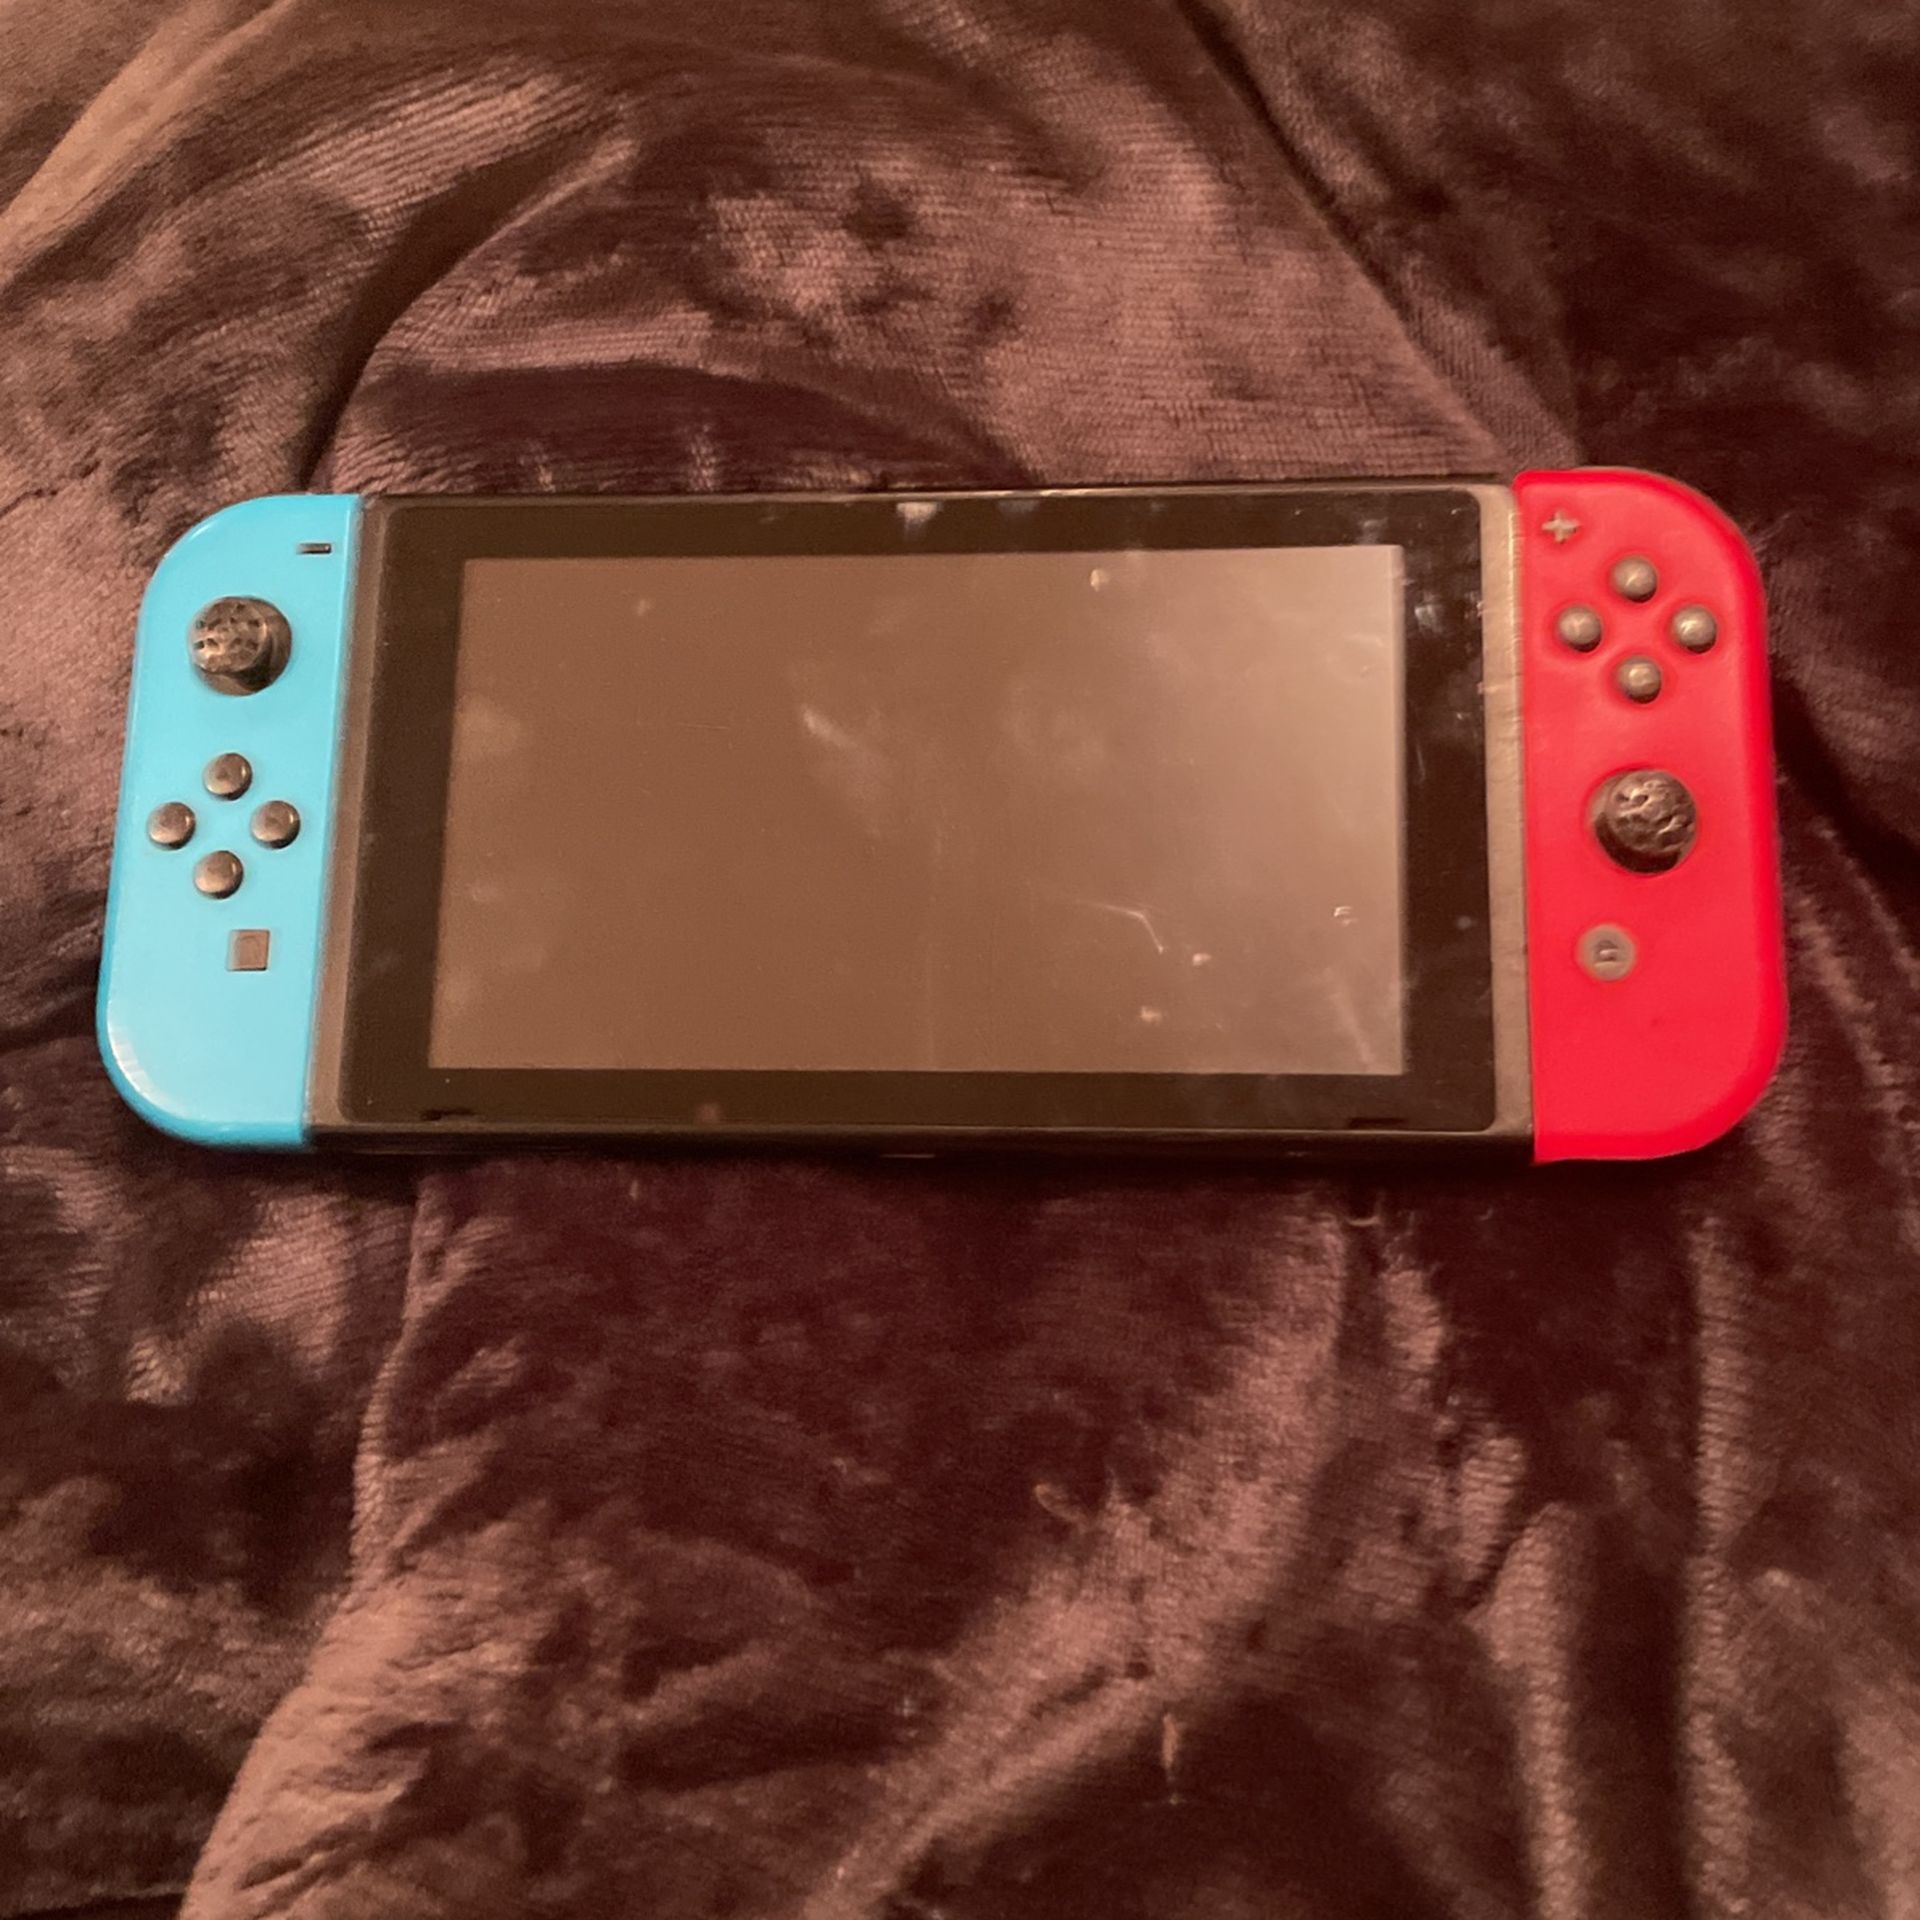 Nintendo switch with case and games